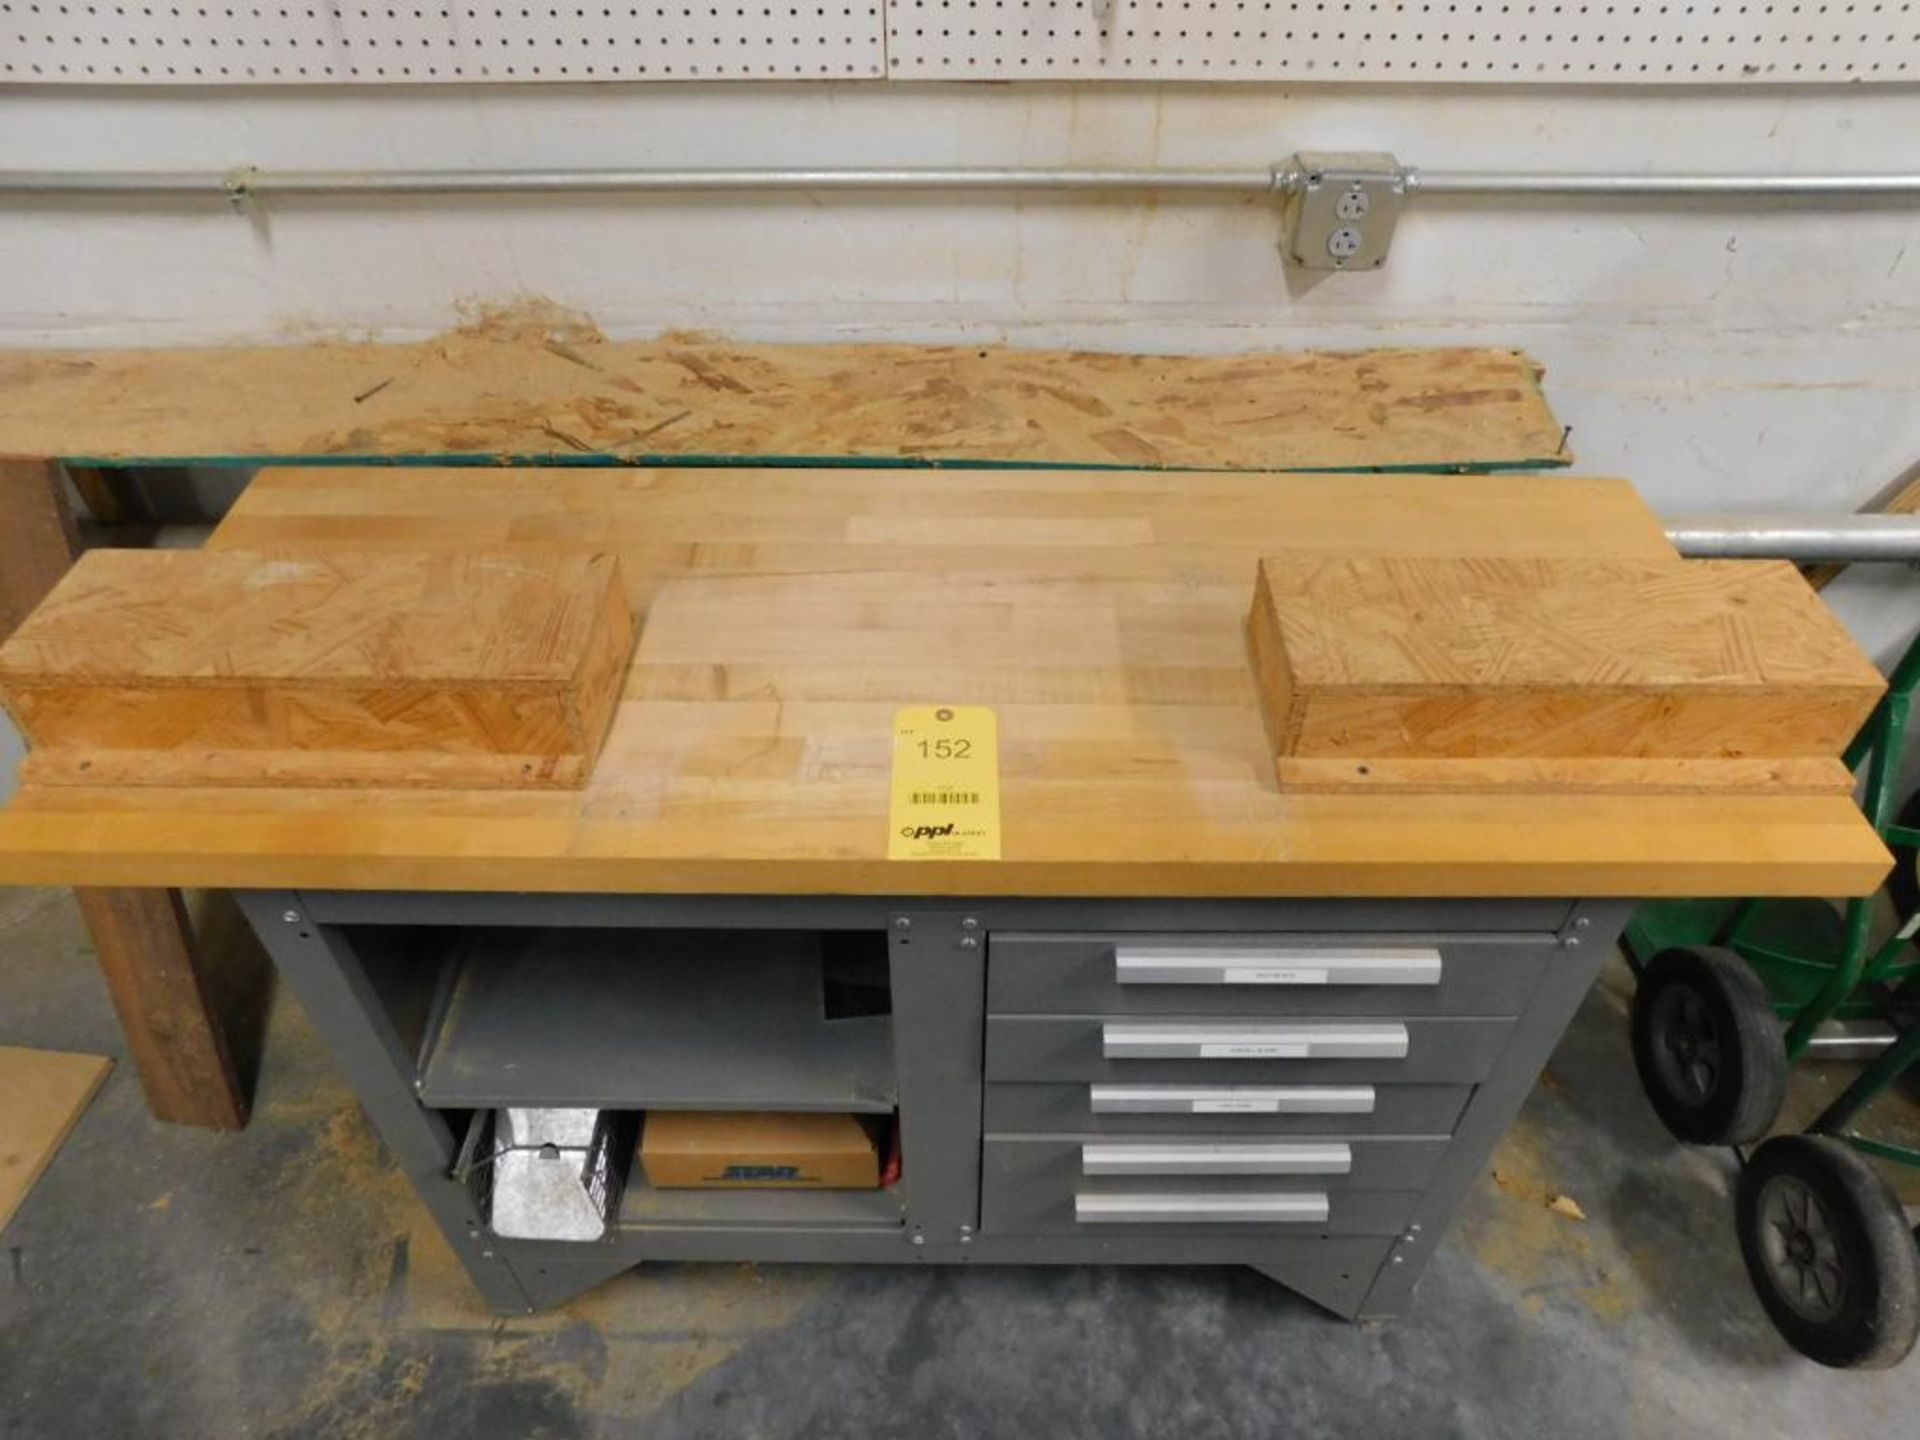 LOT: Kennedy 54" x 20" Maple Top 5-Drawer Work Bench w/Contents of Wood Work Supplies (LOCATION: IN - Image 2 of 6